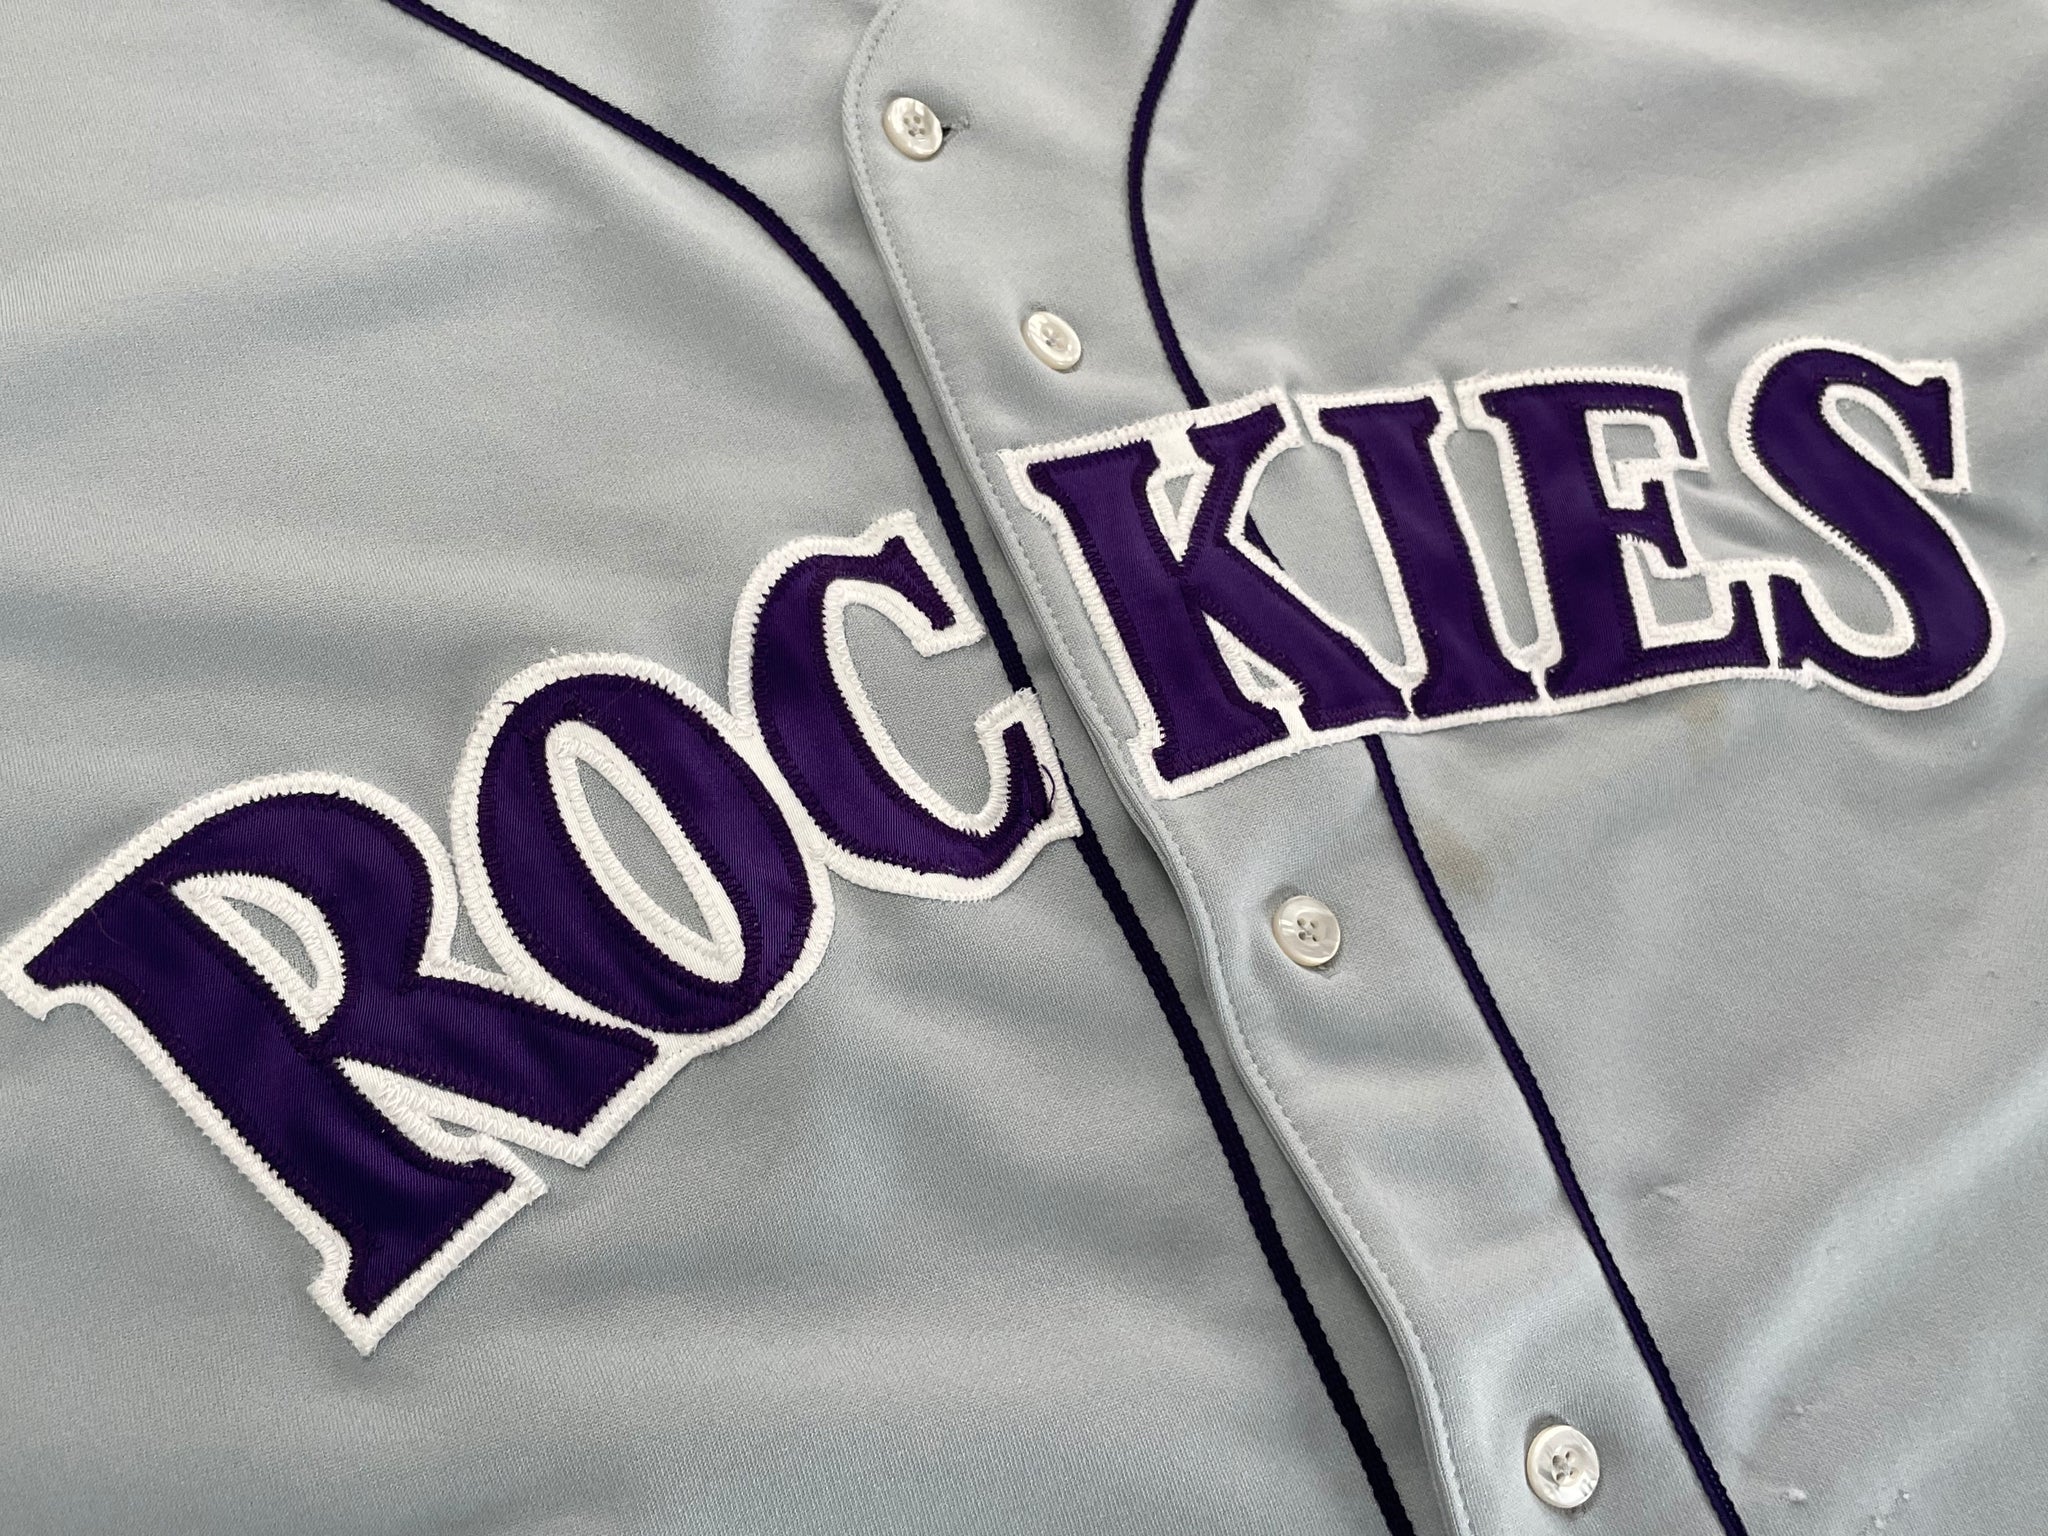 Vintage Colorado Rockies Russell Athletic Baseball Jersey, Size 48, XL